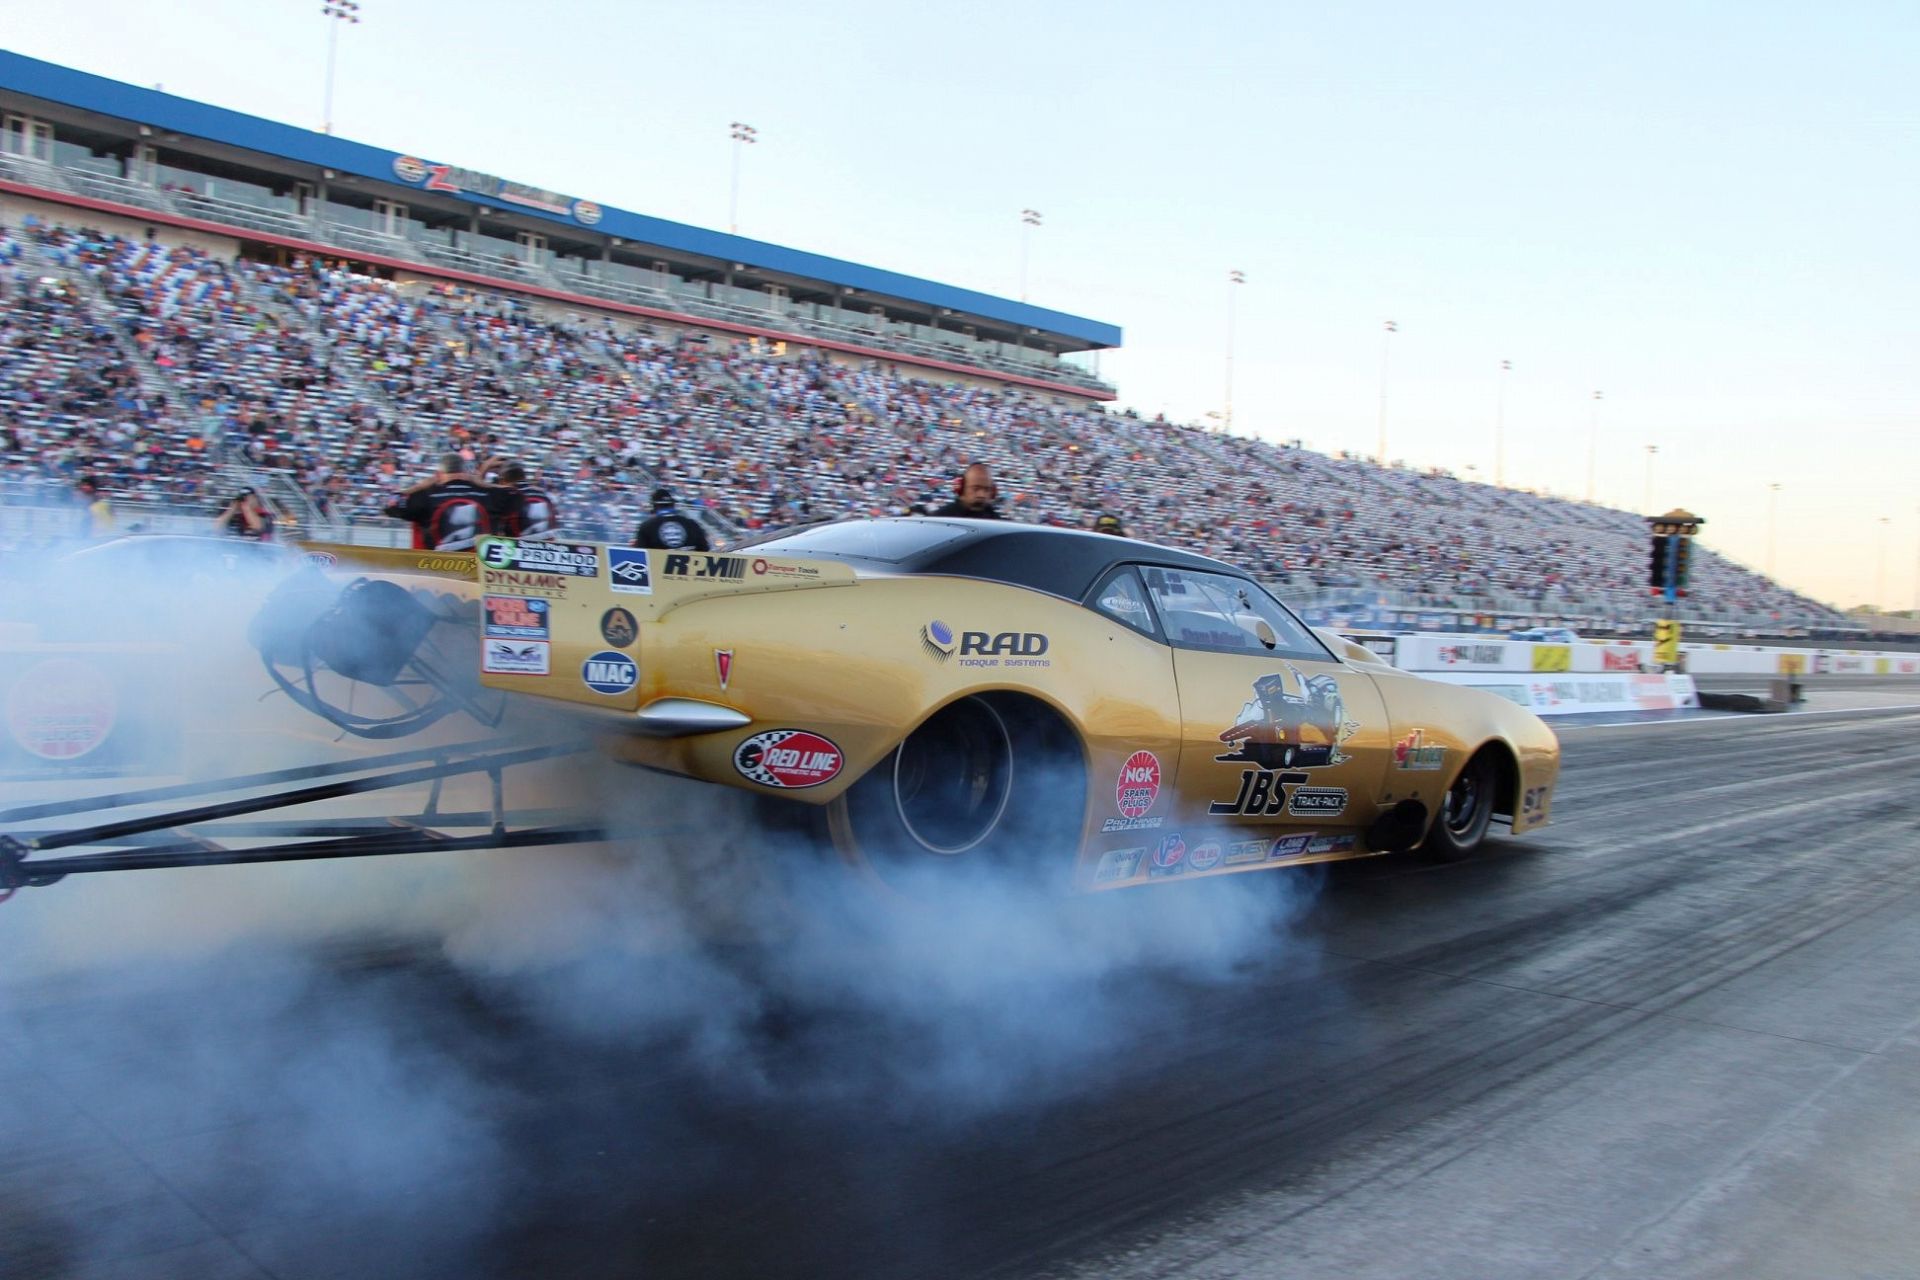 E3 Spark Plugs Highlights the Players in Pro Mod: Shane Molinari Image